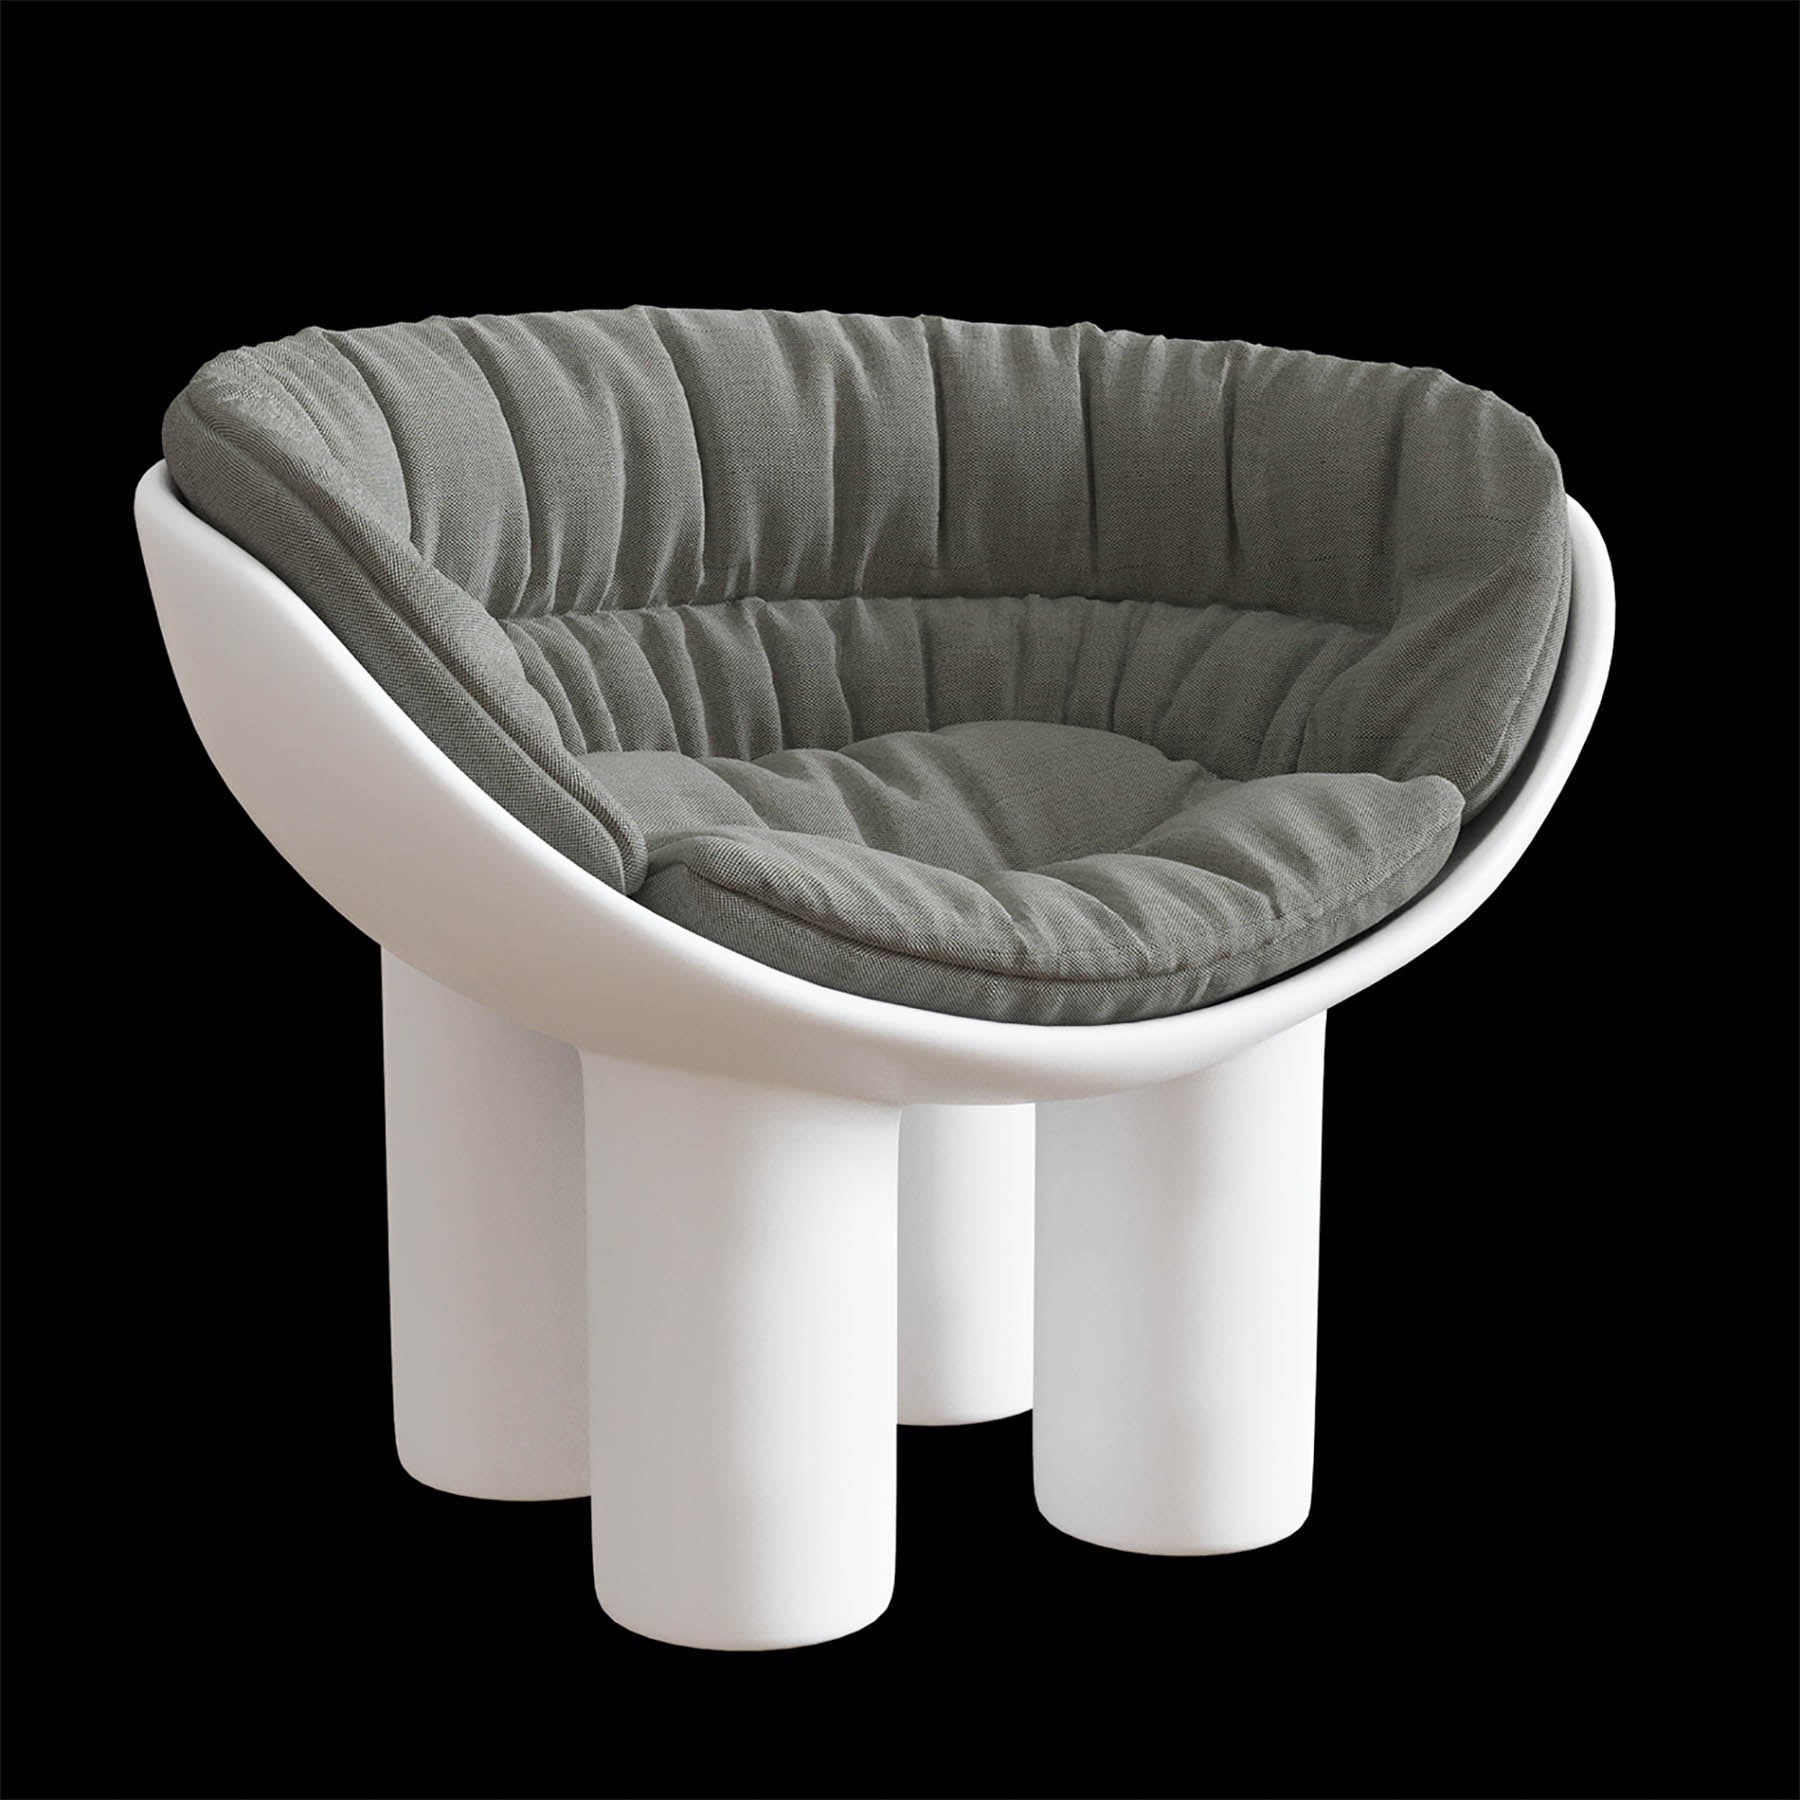 Riala Roly Poly Chair - White